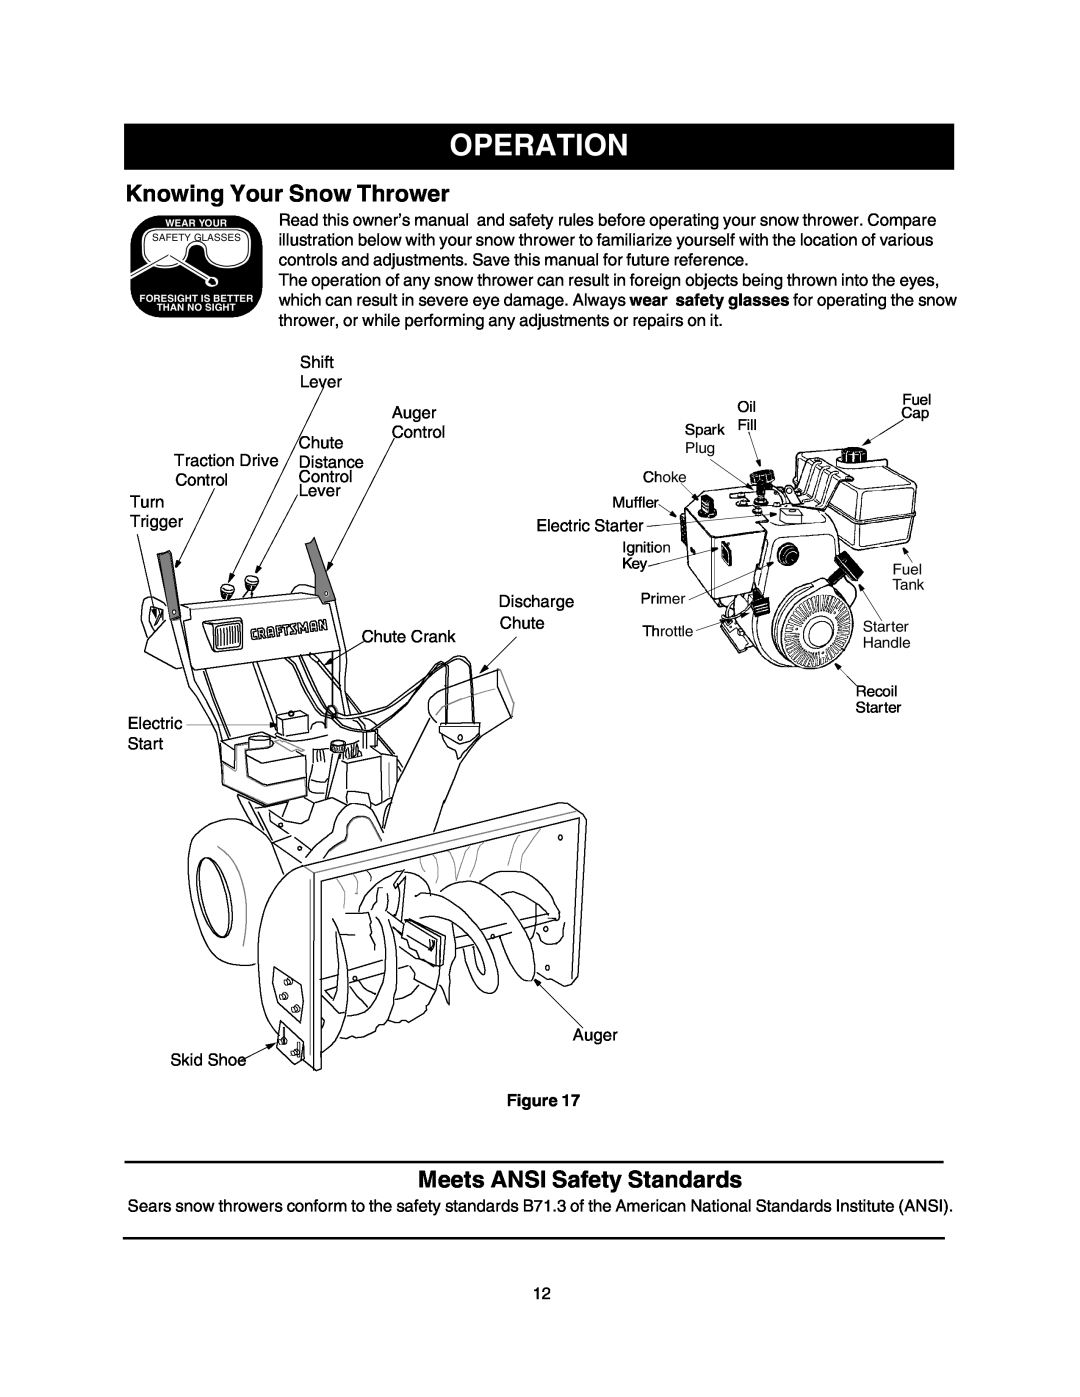 Craftsman 247.88853 owner manual Operation, Knowing Your Snow Thrower, Meets ANSI Safety Standards 